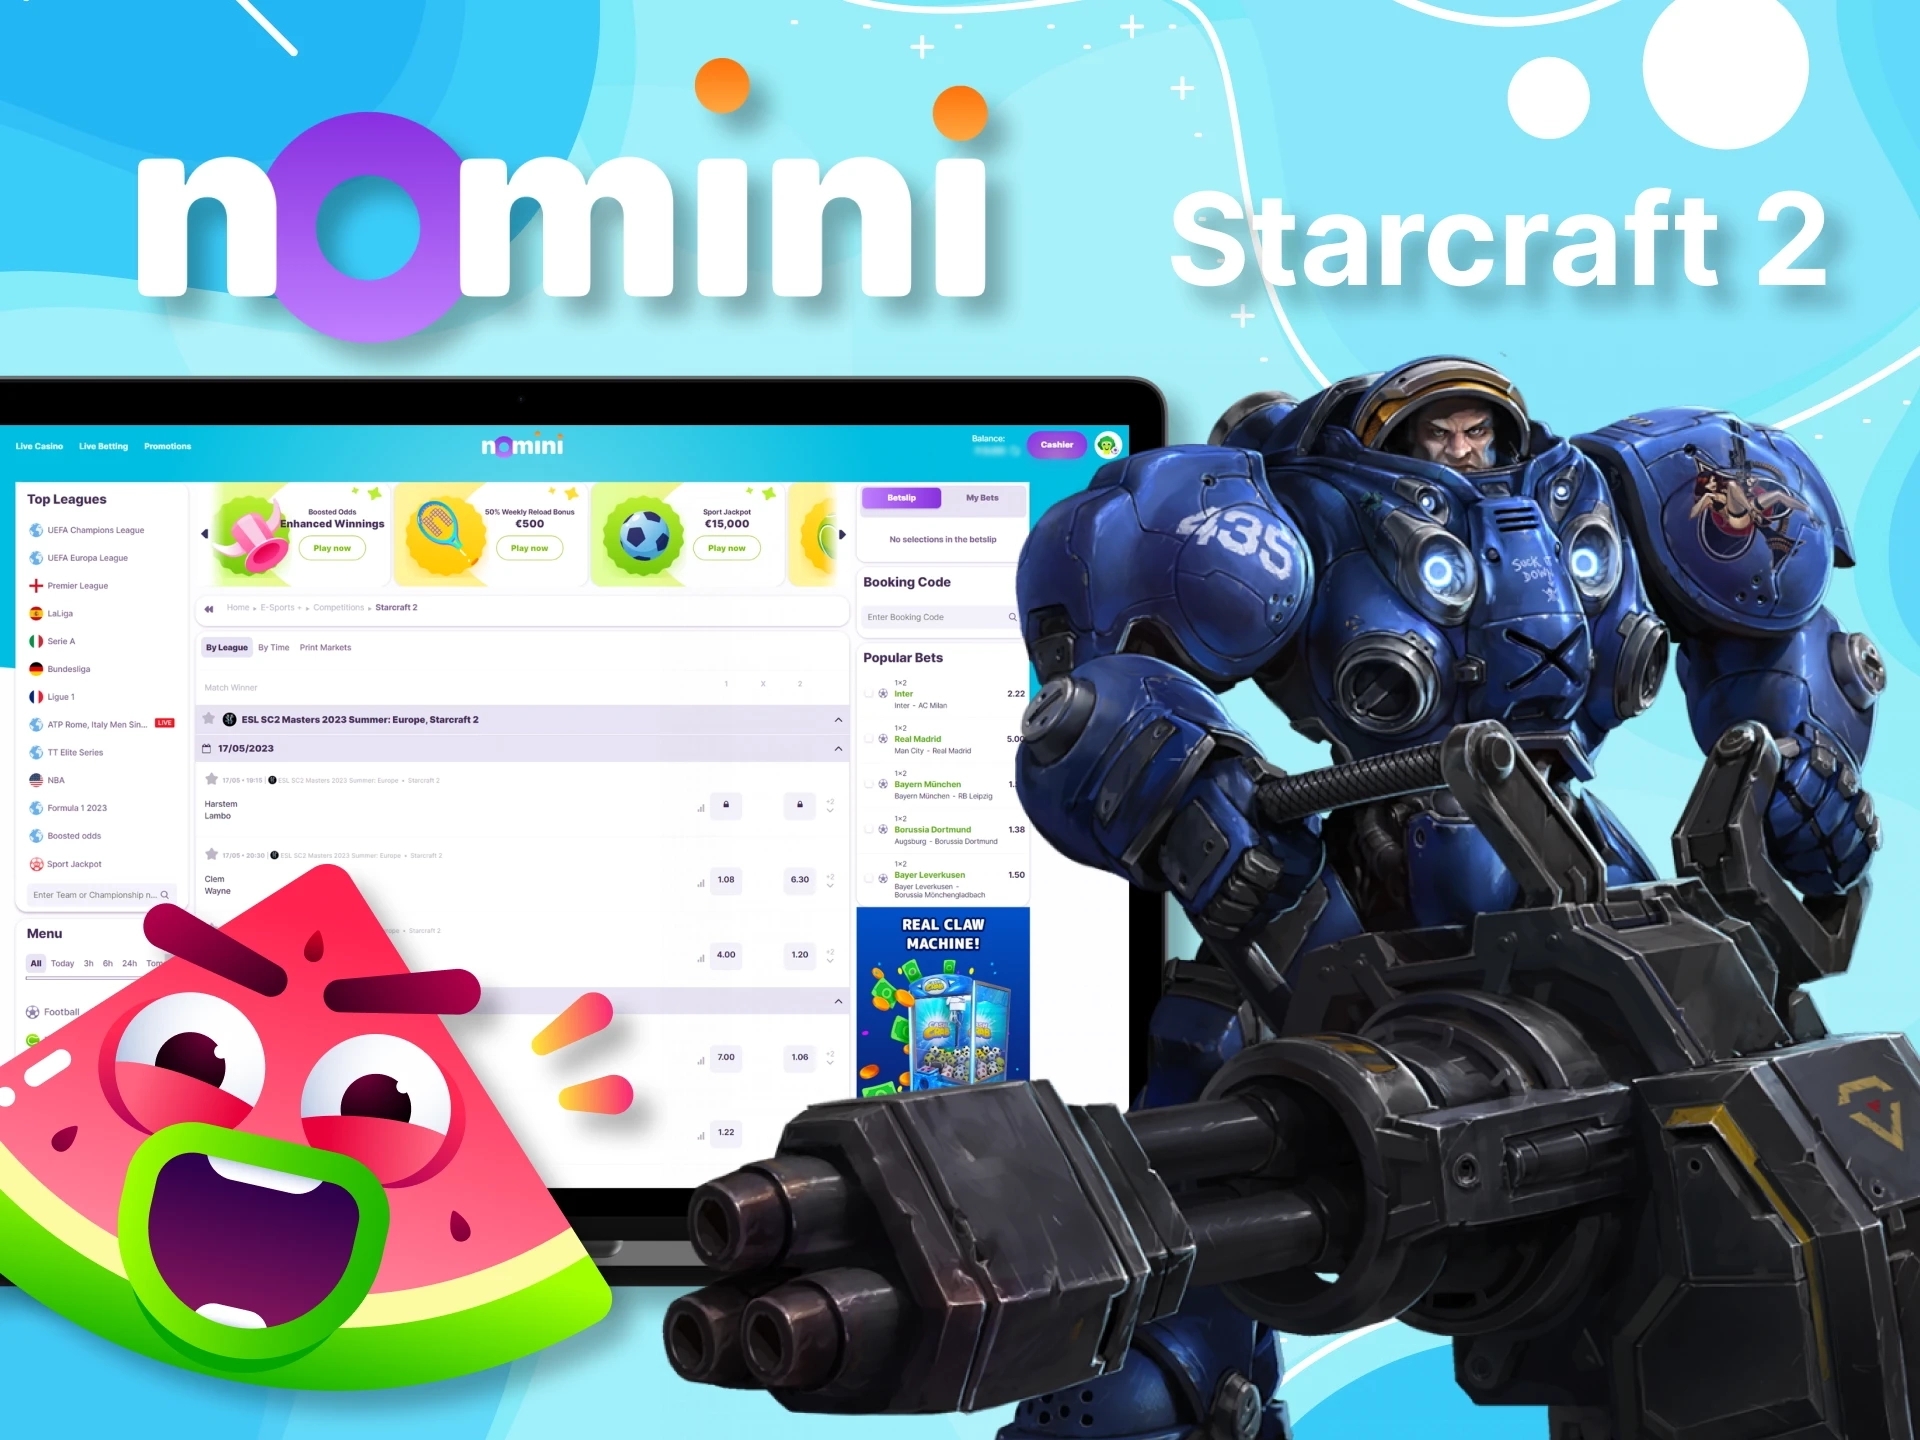 If you're a Starcraft 2 fan, bet on your favorite team winning at Nomini.